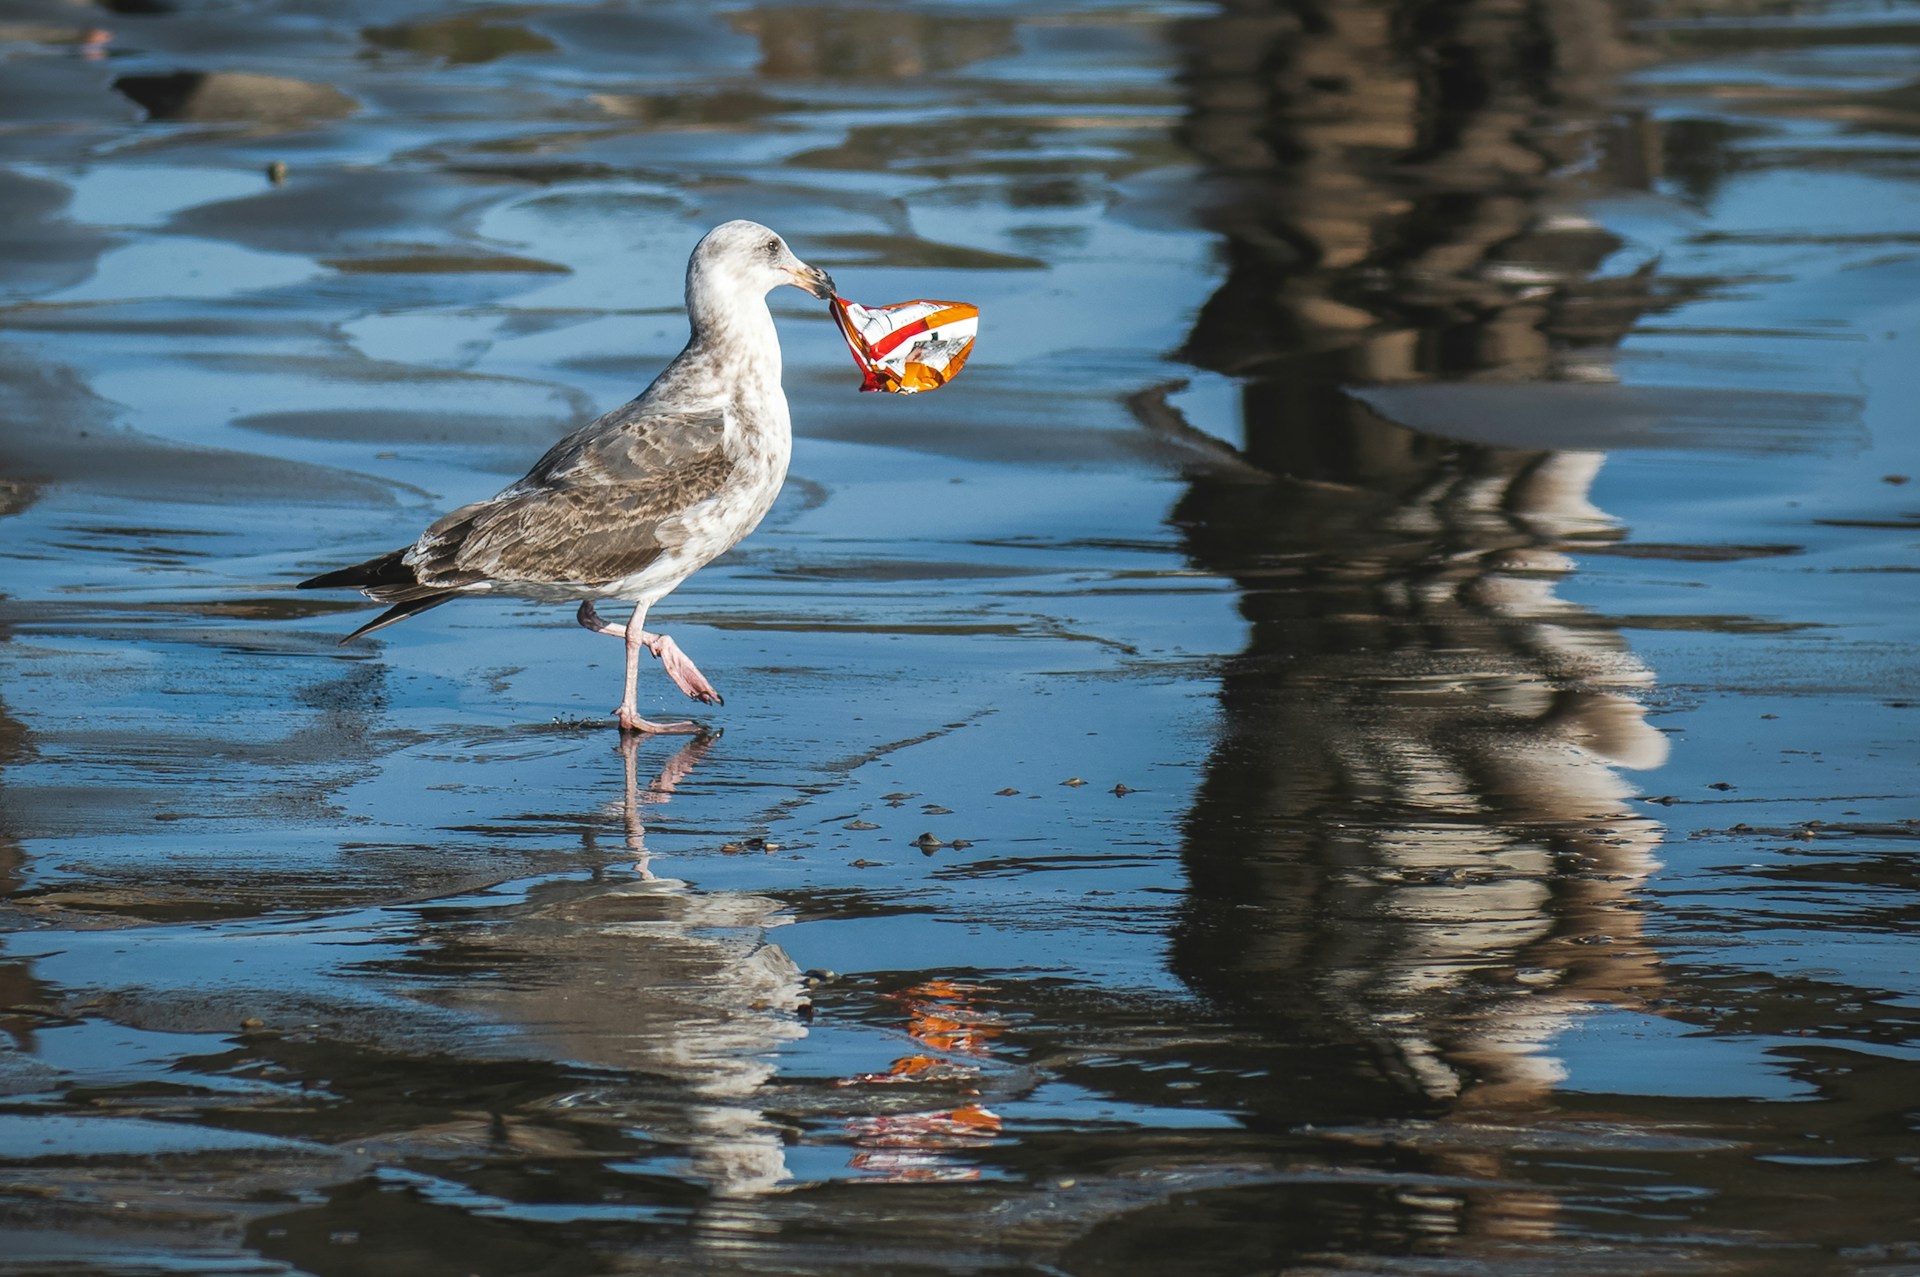 seagull walking in water with Cheetos bag in its mouth